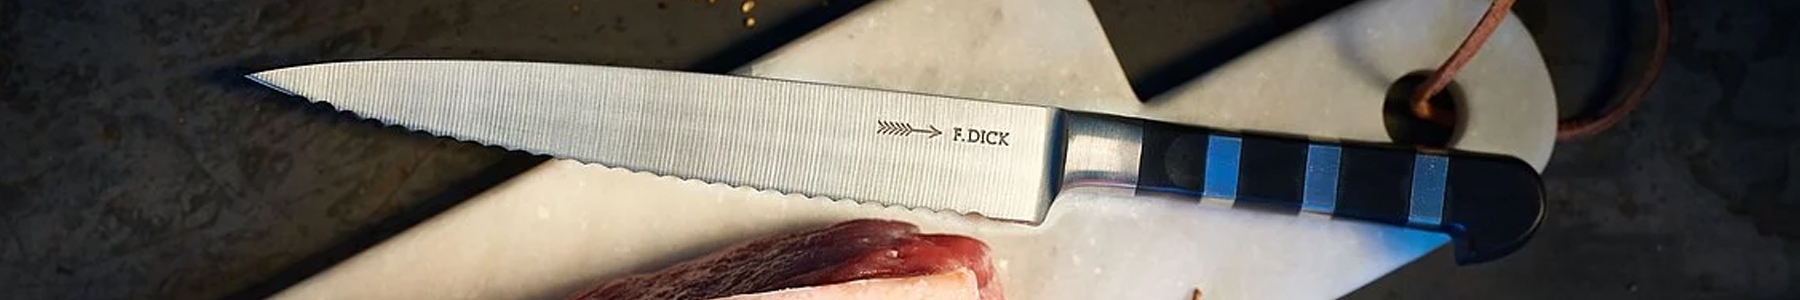 FDick 1905 series carving knife